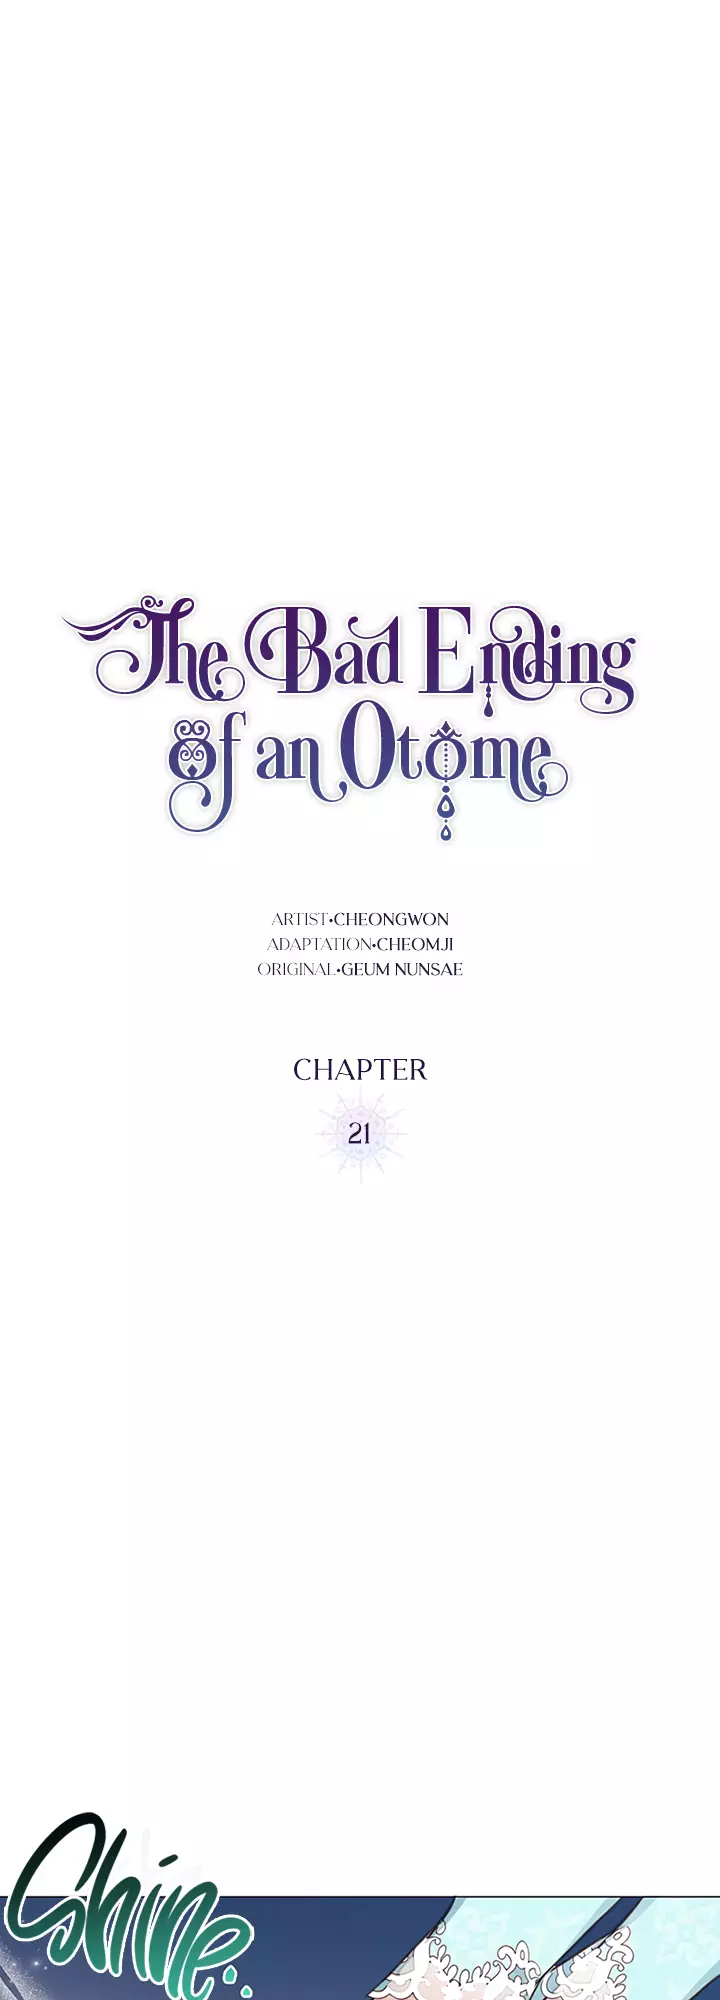 The Bad Ending Of The Otome Game - 21 page 14-4b3c1a56